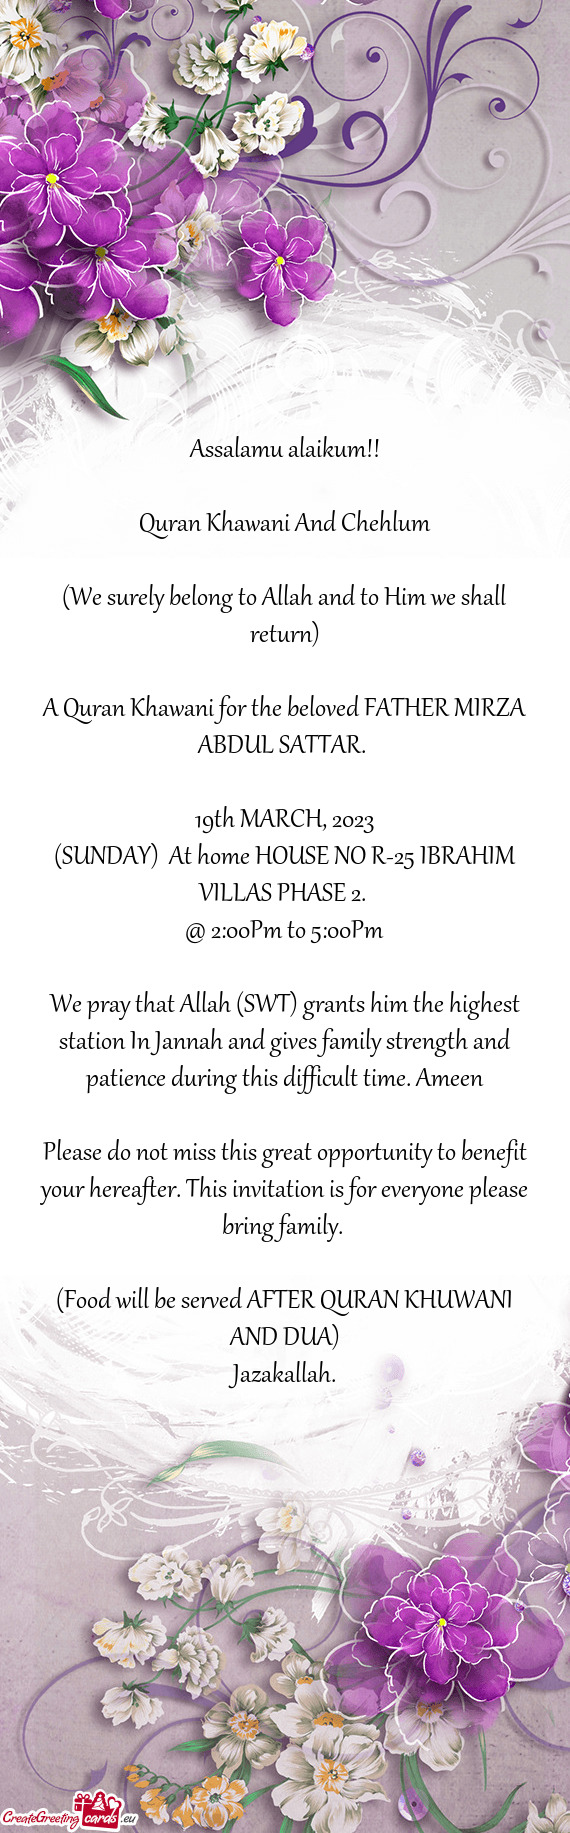 A Quran Khawani for the beloved FATHER MIRZA ABDUL SATTAR